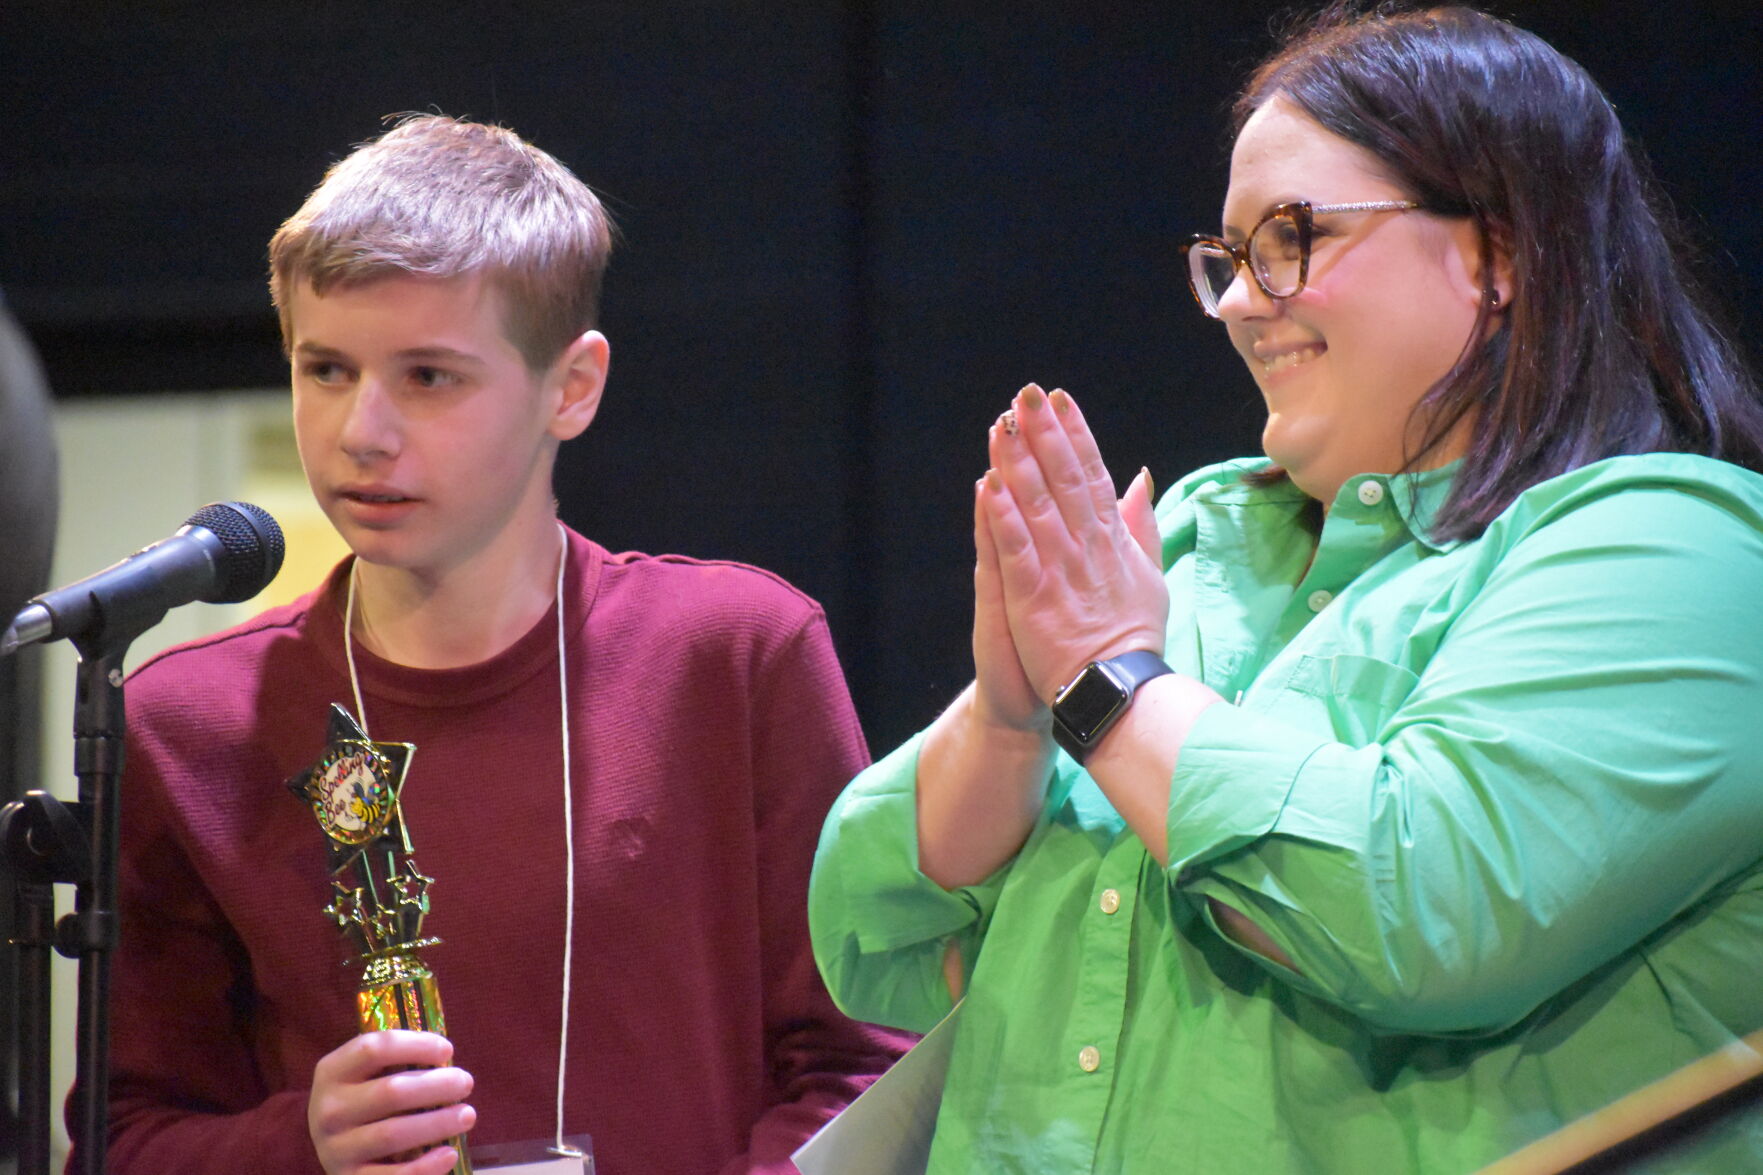 Cupola for the win. Harrison County's Isaac Boyce clinches regional  spelling bee, Local News